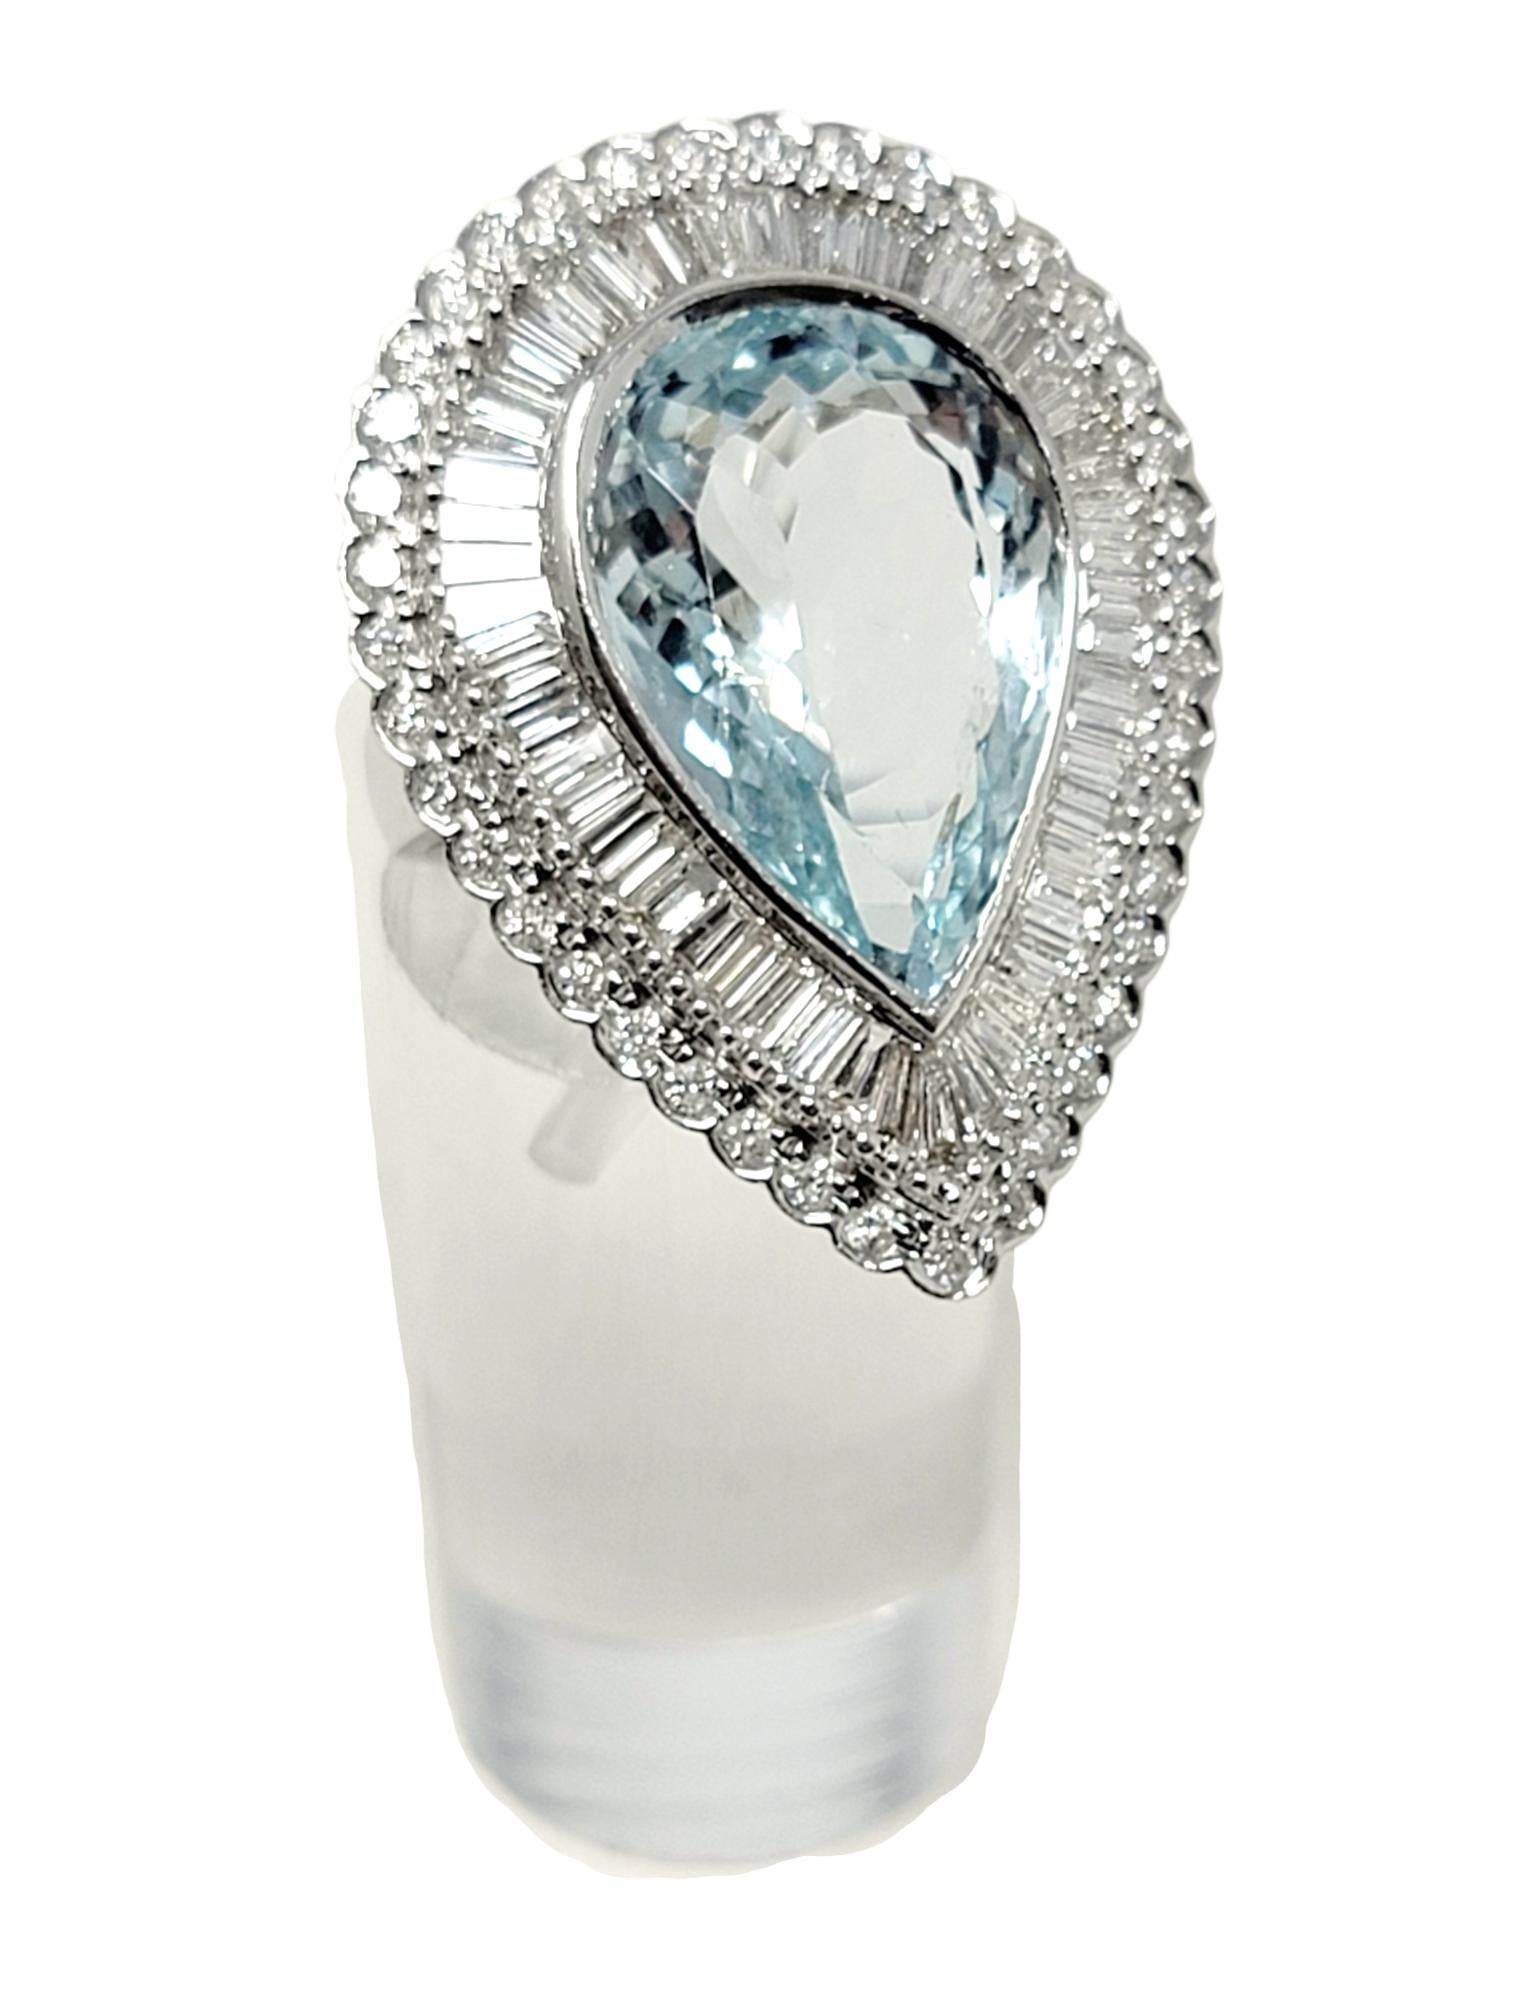 11.85 Carats Total Pear Cut Aquamarine and Diamond Cocktail Ring 18 Karat Gold For Sale 7